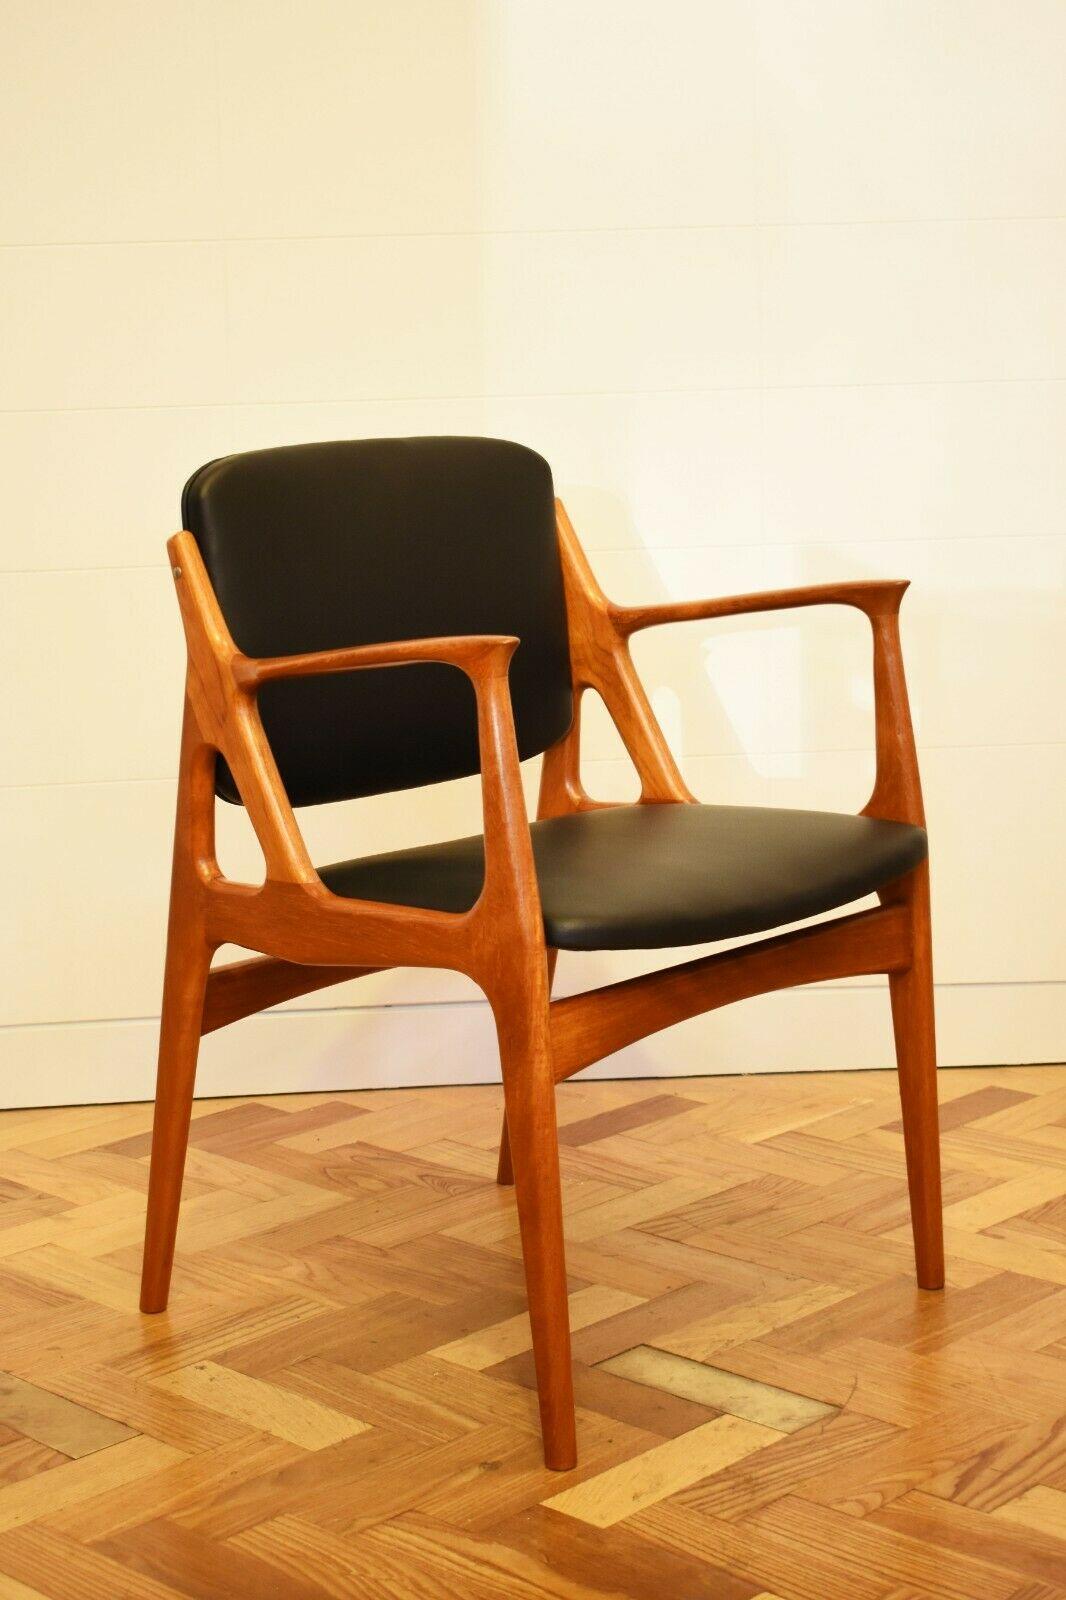 1960s Danish Arne Vodder 'Ella' armchair in teakwood and leather for Vamo

Extremely rare, this armchair features a black leather upholstered seat and back, which appear to float within the teakwood sculptural frame.


About the Designer:
Arne